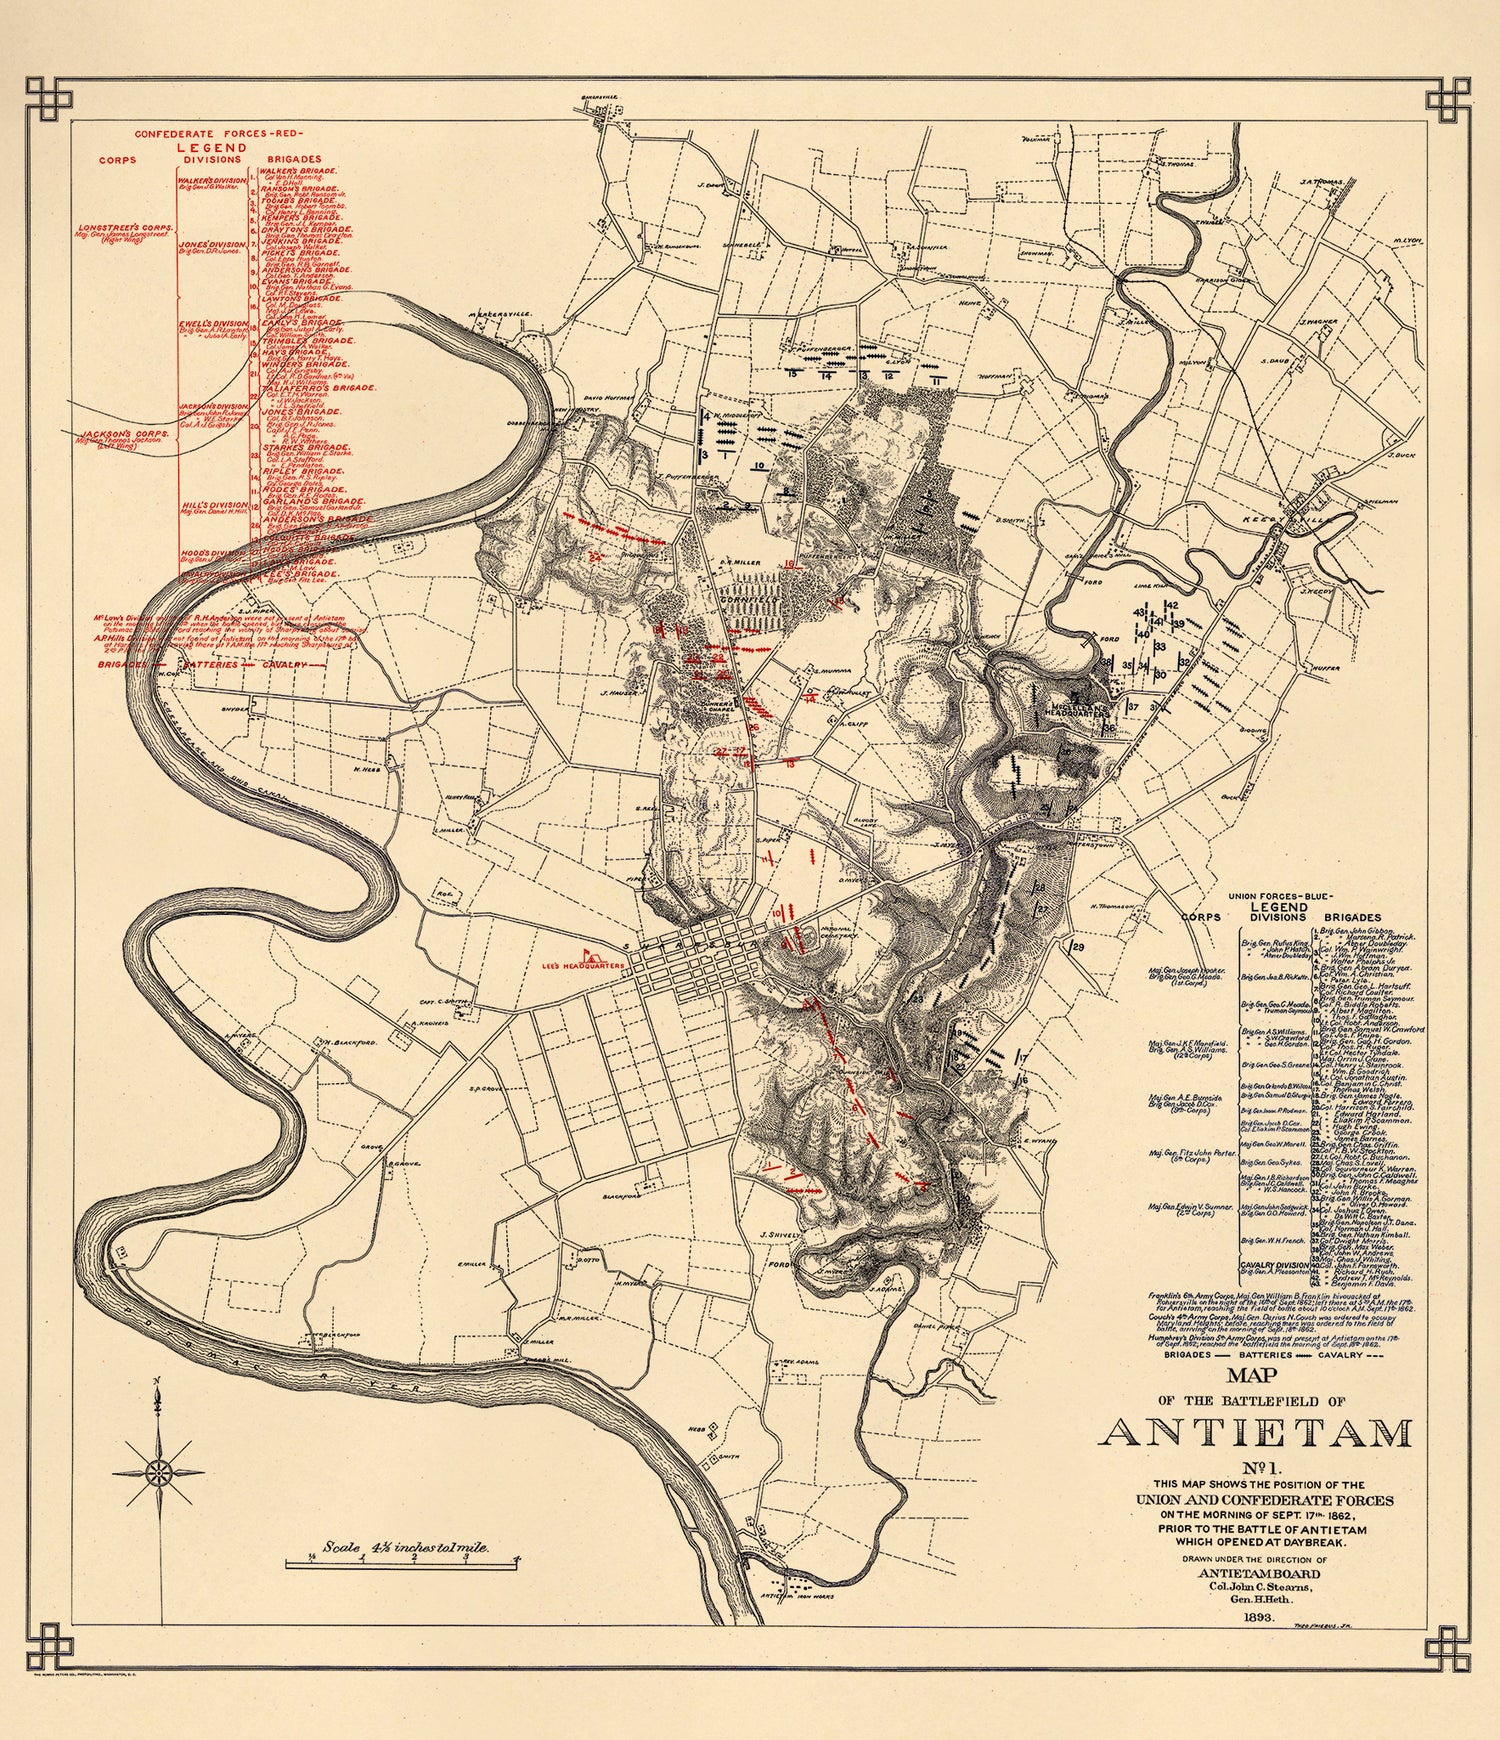 Map of the Battlefield of Antietam. No. 1. This Map Shows the Position of the Union and Confederate Forces On the Morning of Sept. 17th, 1862, Prior to the Battle of Antietam Which Opened at Daybreak 1893